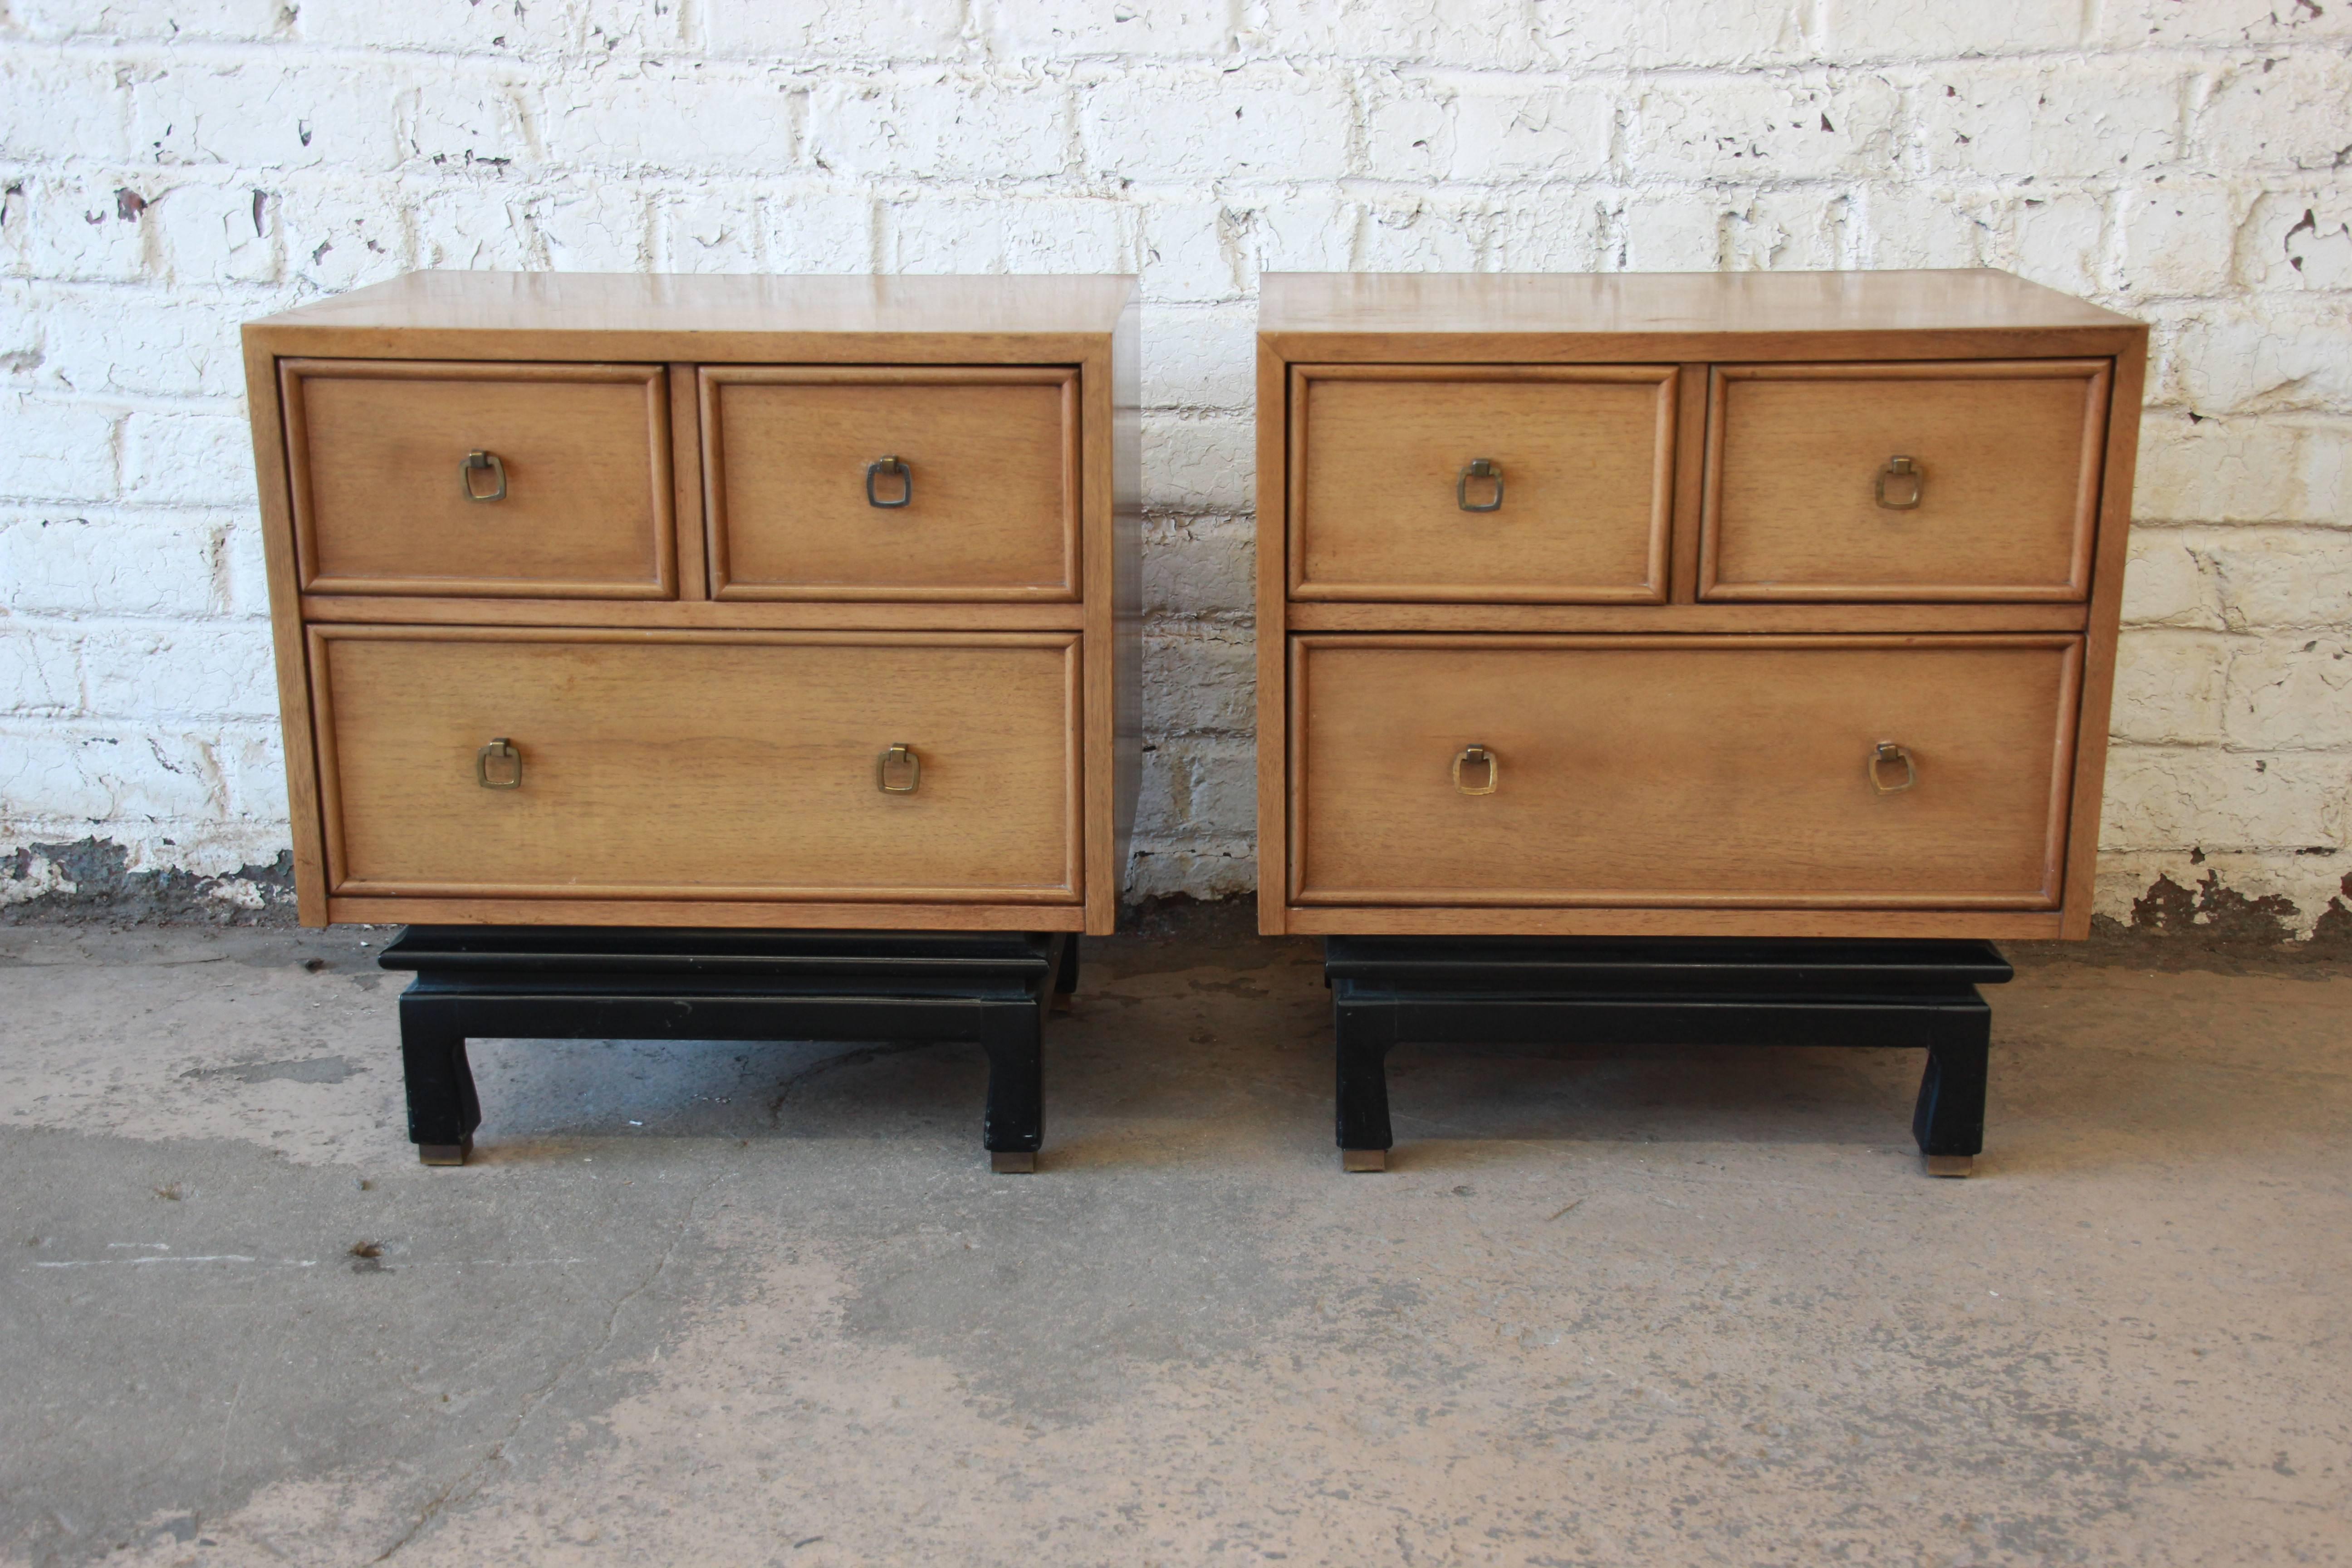 A stylish pair of Mid-Century Modern Asian inspired nightstands or end tables designed by Merton Gershun for American of Martinsville. The nightstands feature beautiful bleached walnut wood grain and original brass drawer pulls. They are accented